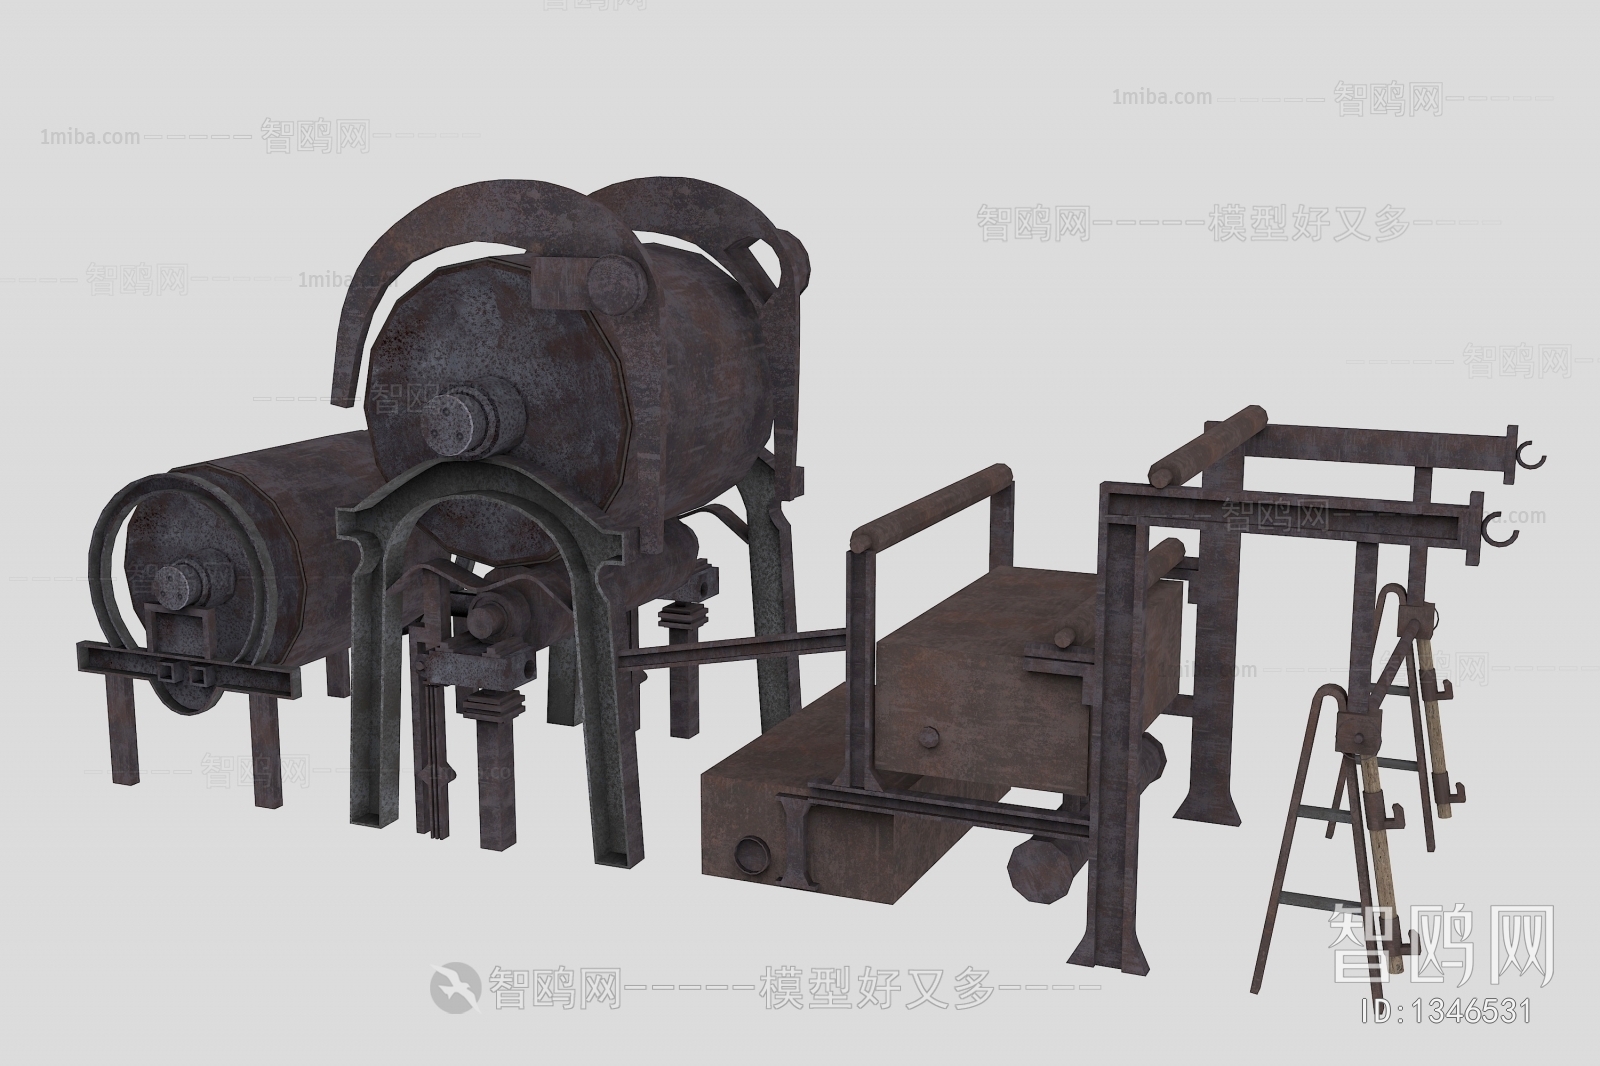 Industrial Style Industrial Equipment